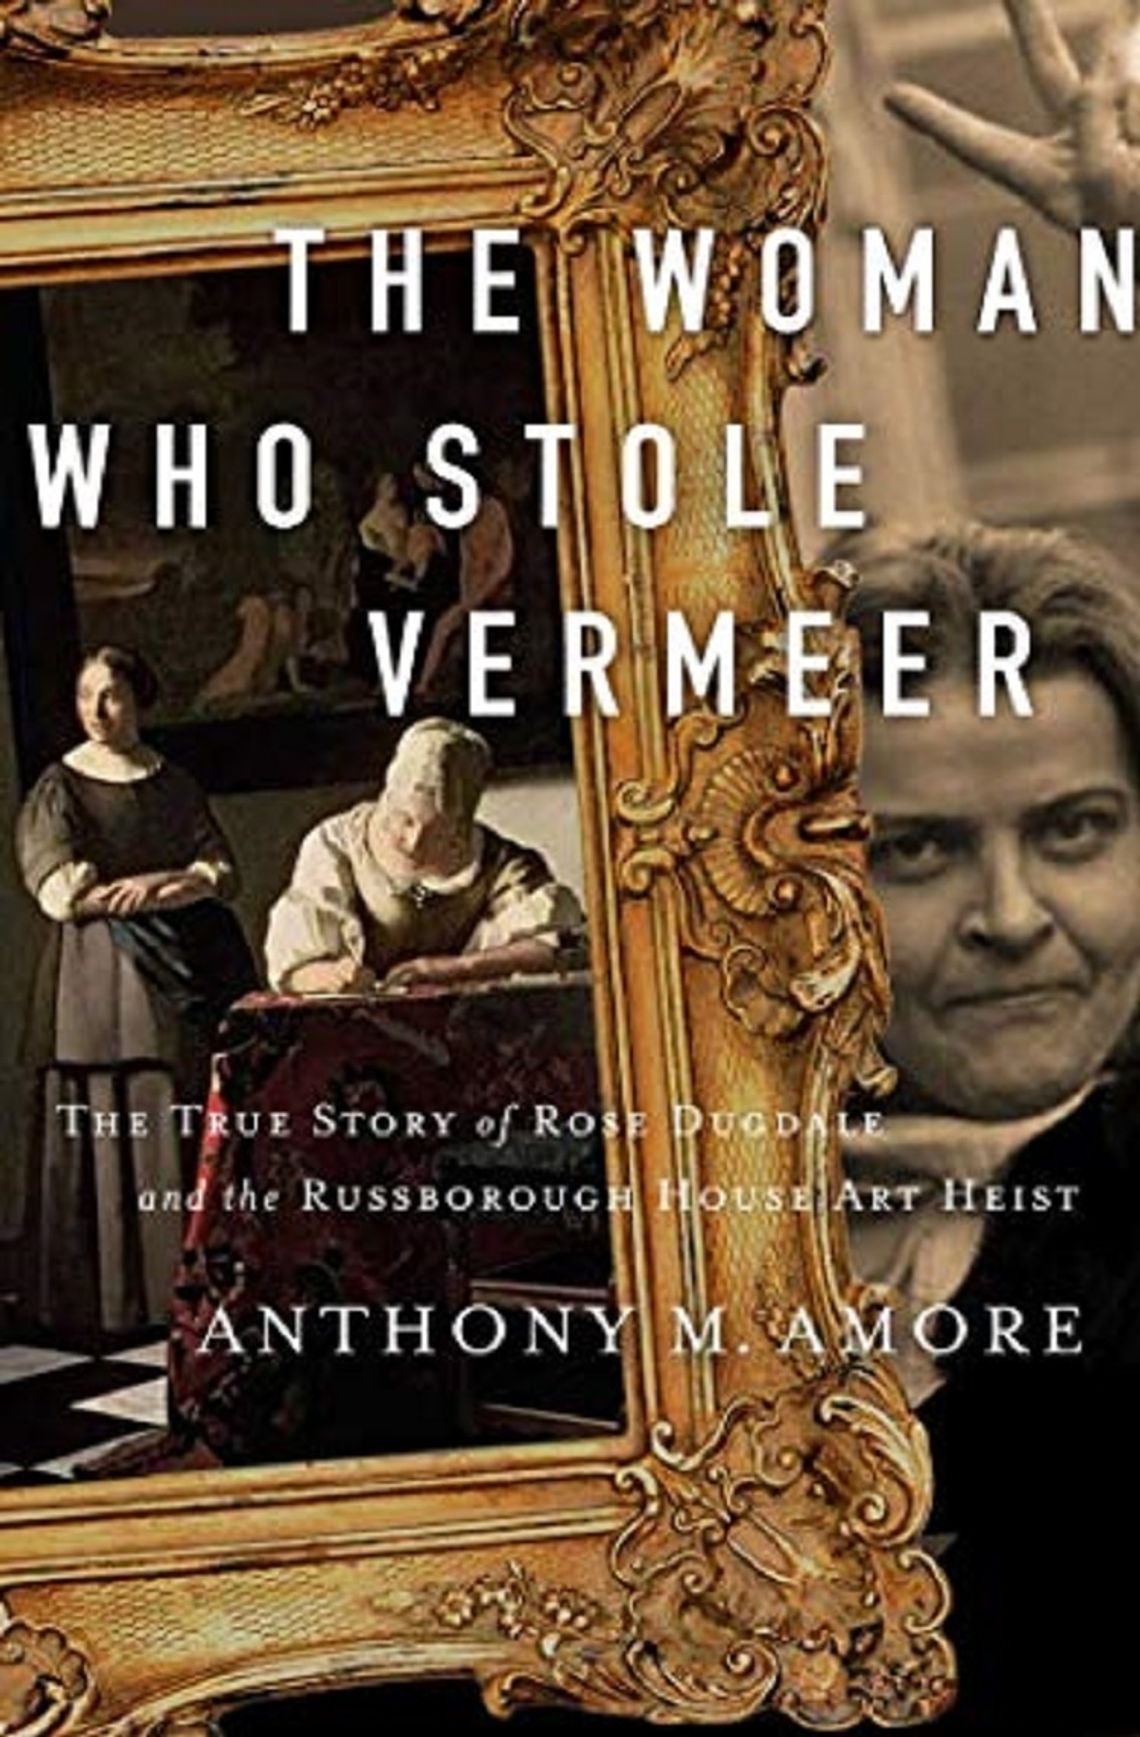 Carol's Book Review - The Woman Who Stole Vermeer